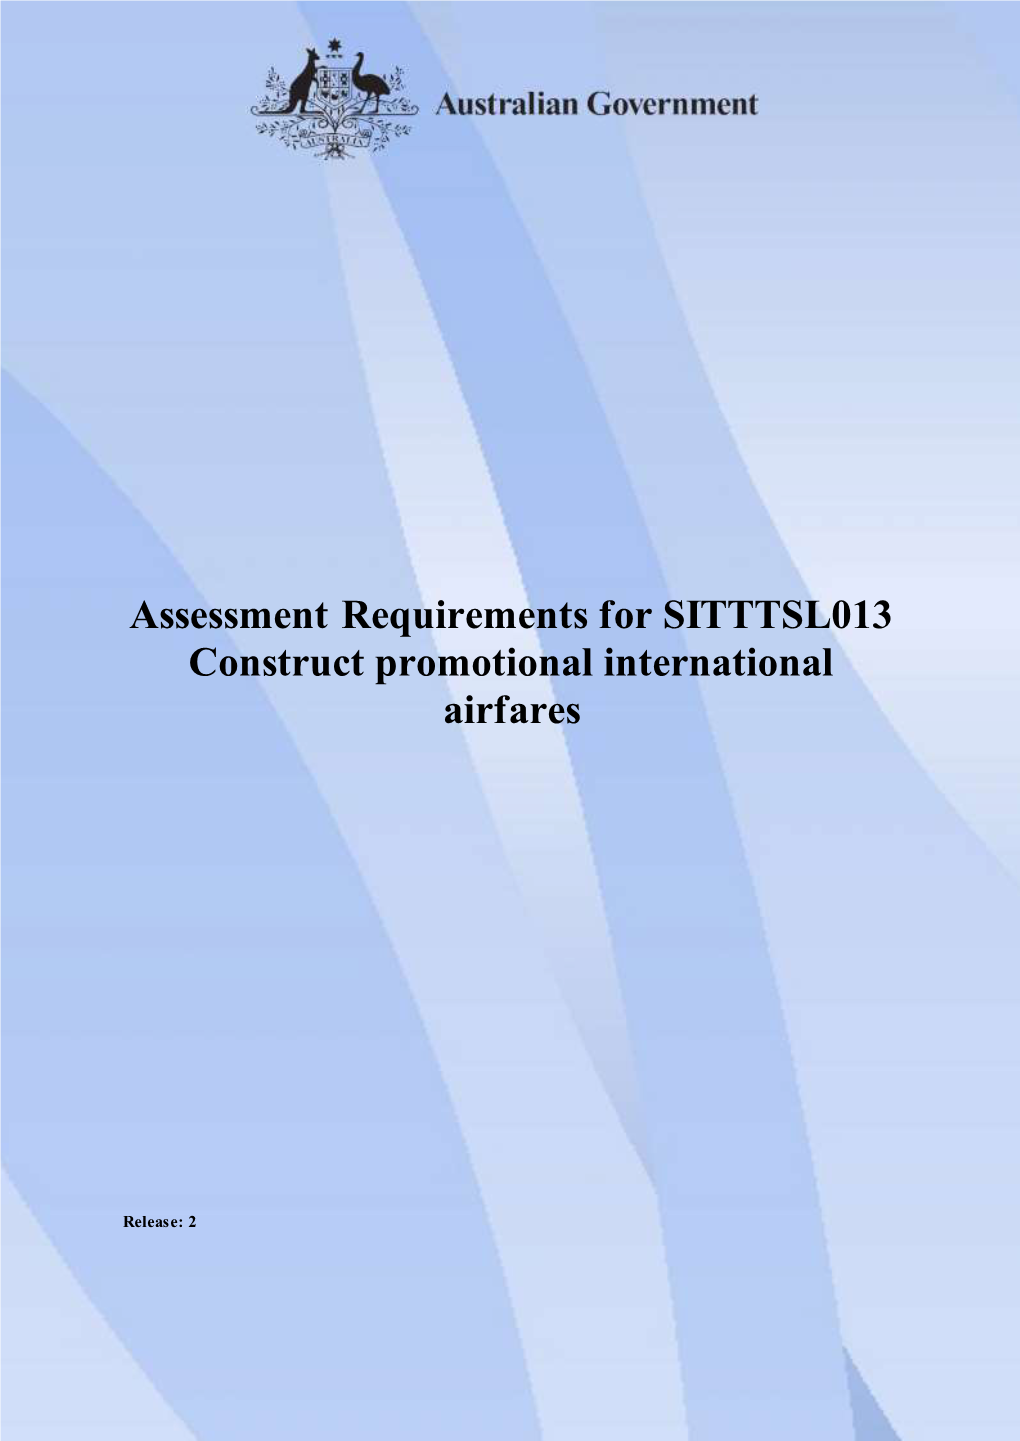 Assessment Requirements for SITTTSL013 Construct Promotional International Airfares